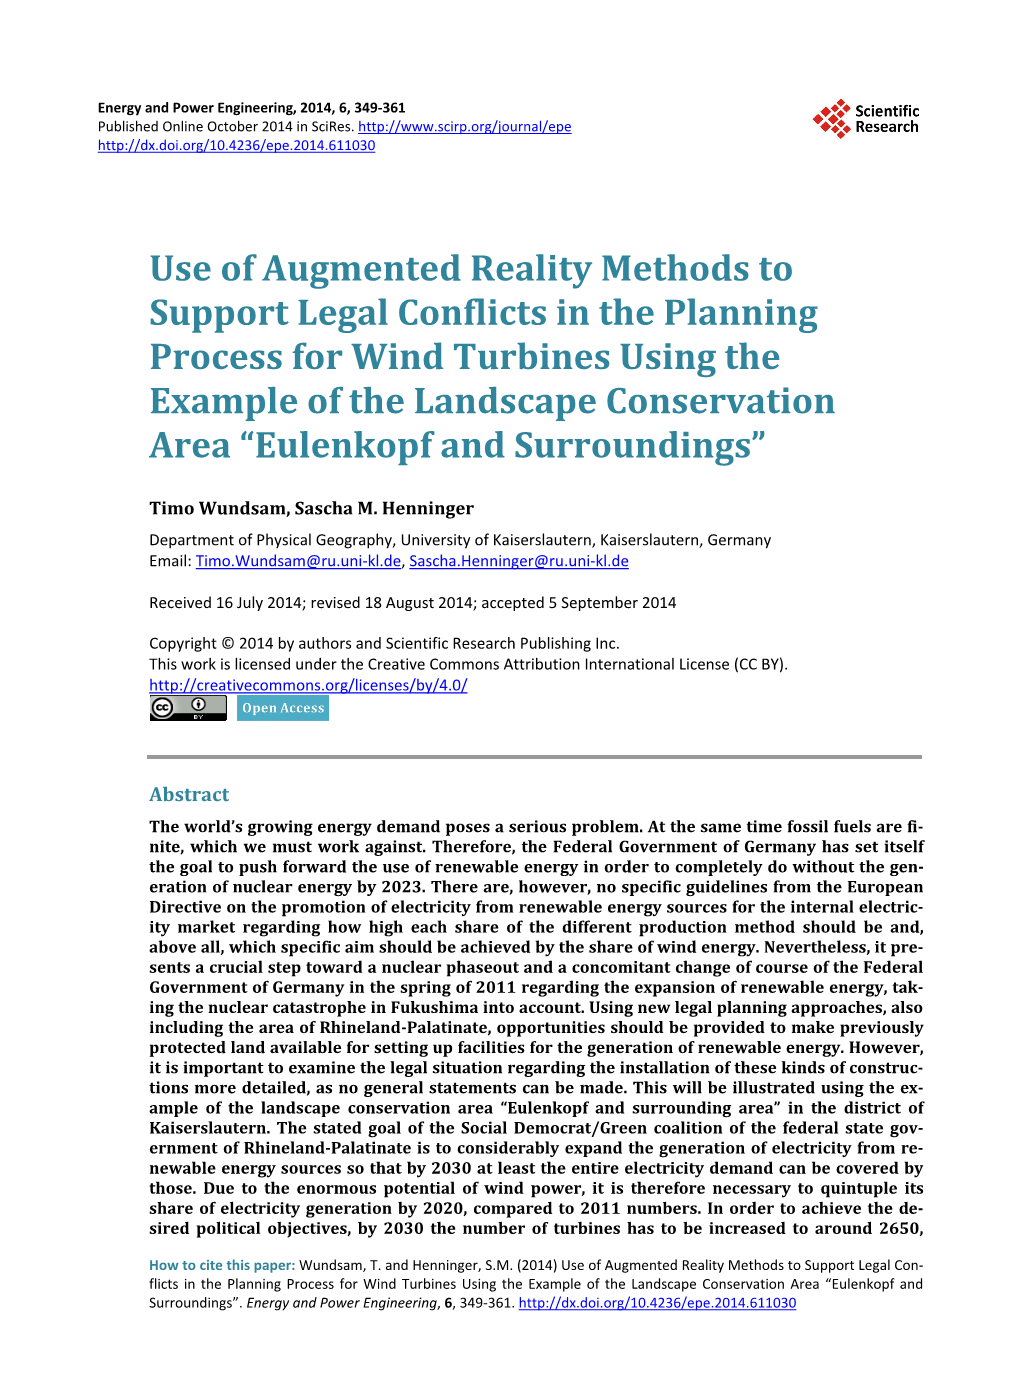 Use of Augmented Reality Methods to Support Legal Conflicts in The